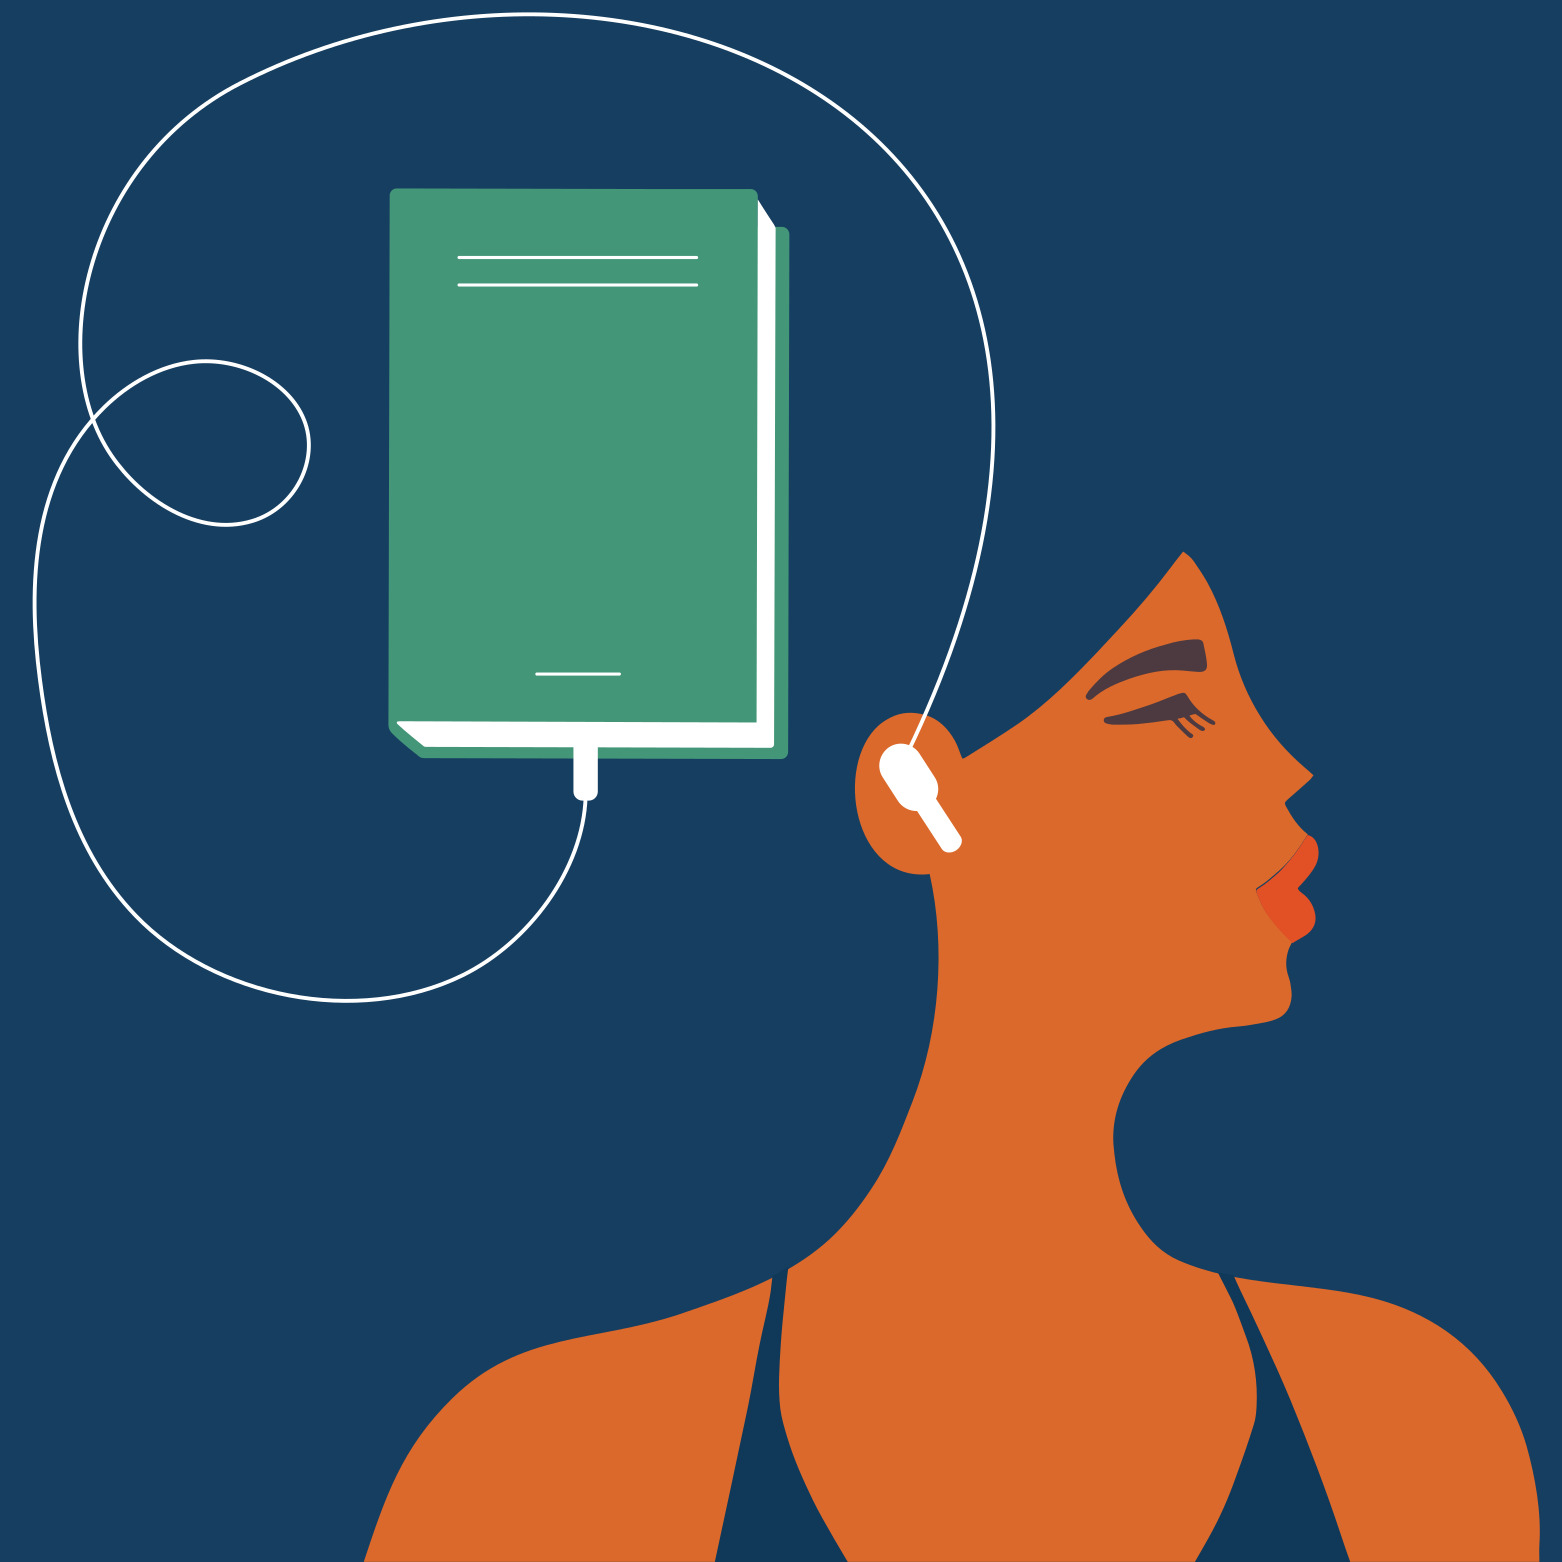 A woman wearing headphones and holding a book, engrossed in her reading.